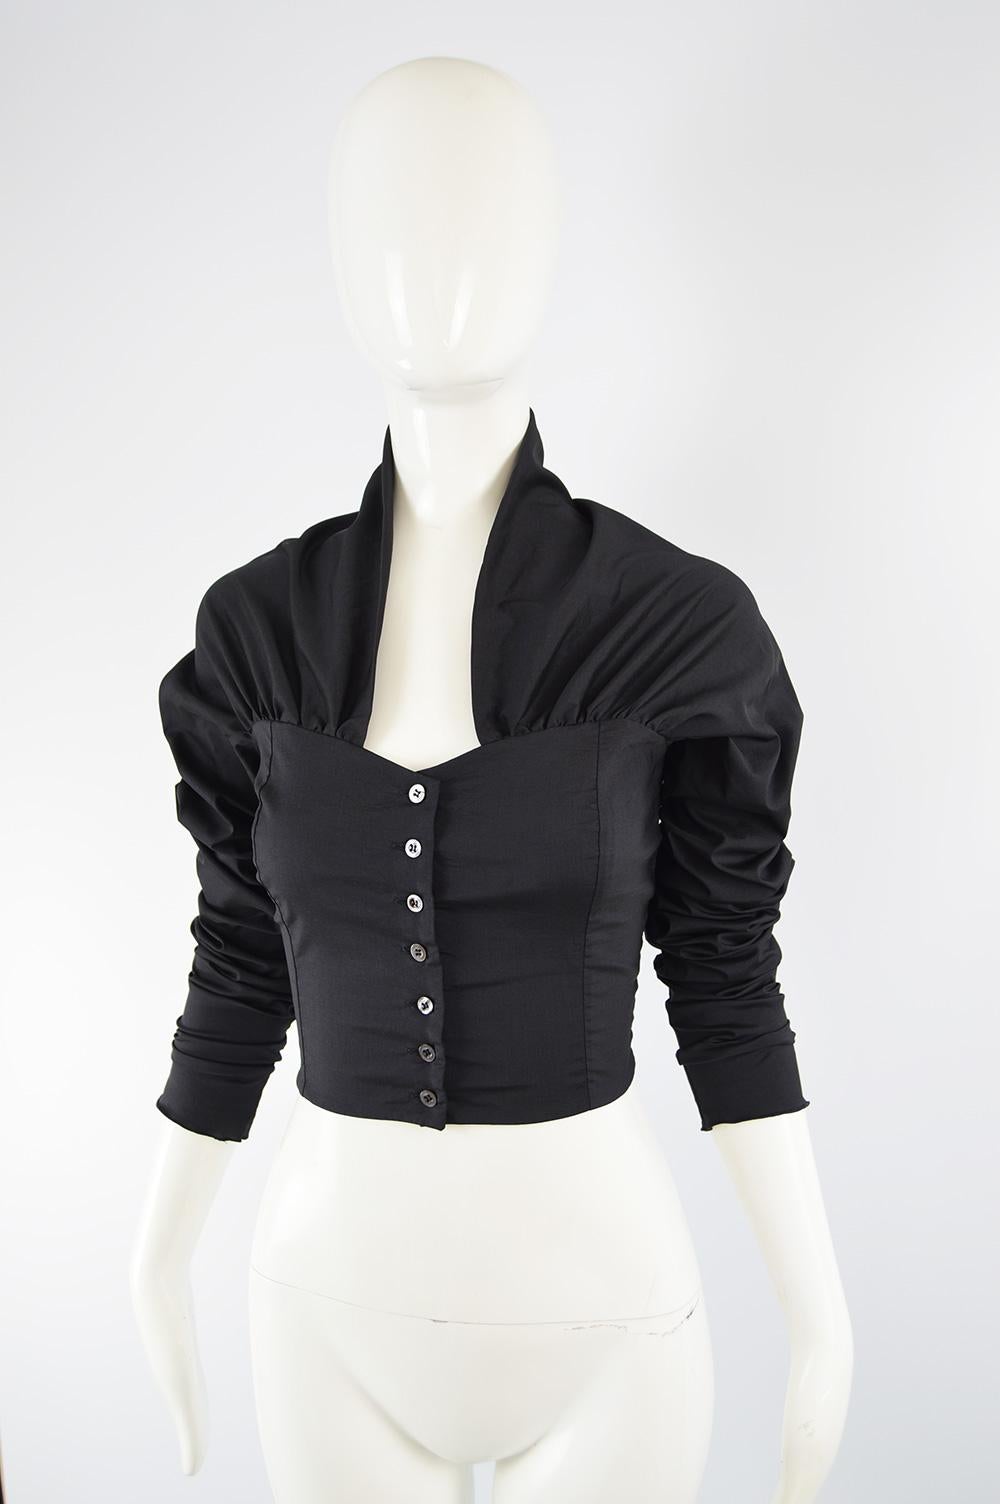 Dolce & Gabbana Vintage Ultra Long Sleeves Black Silk Bodice Top, 1990s In Good Condition For Sale In Doncaster, South Yorkshire